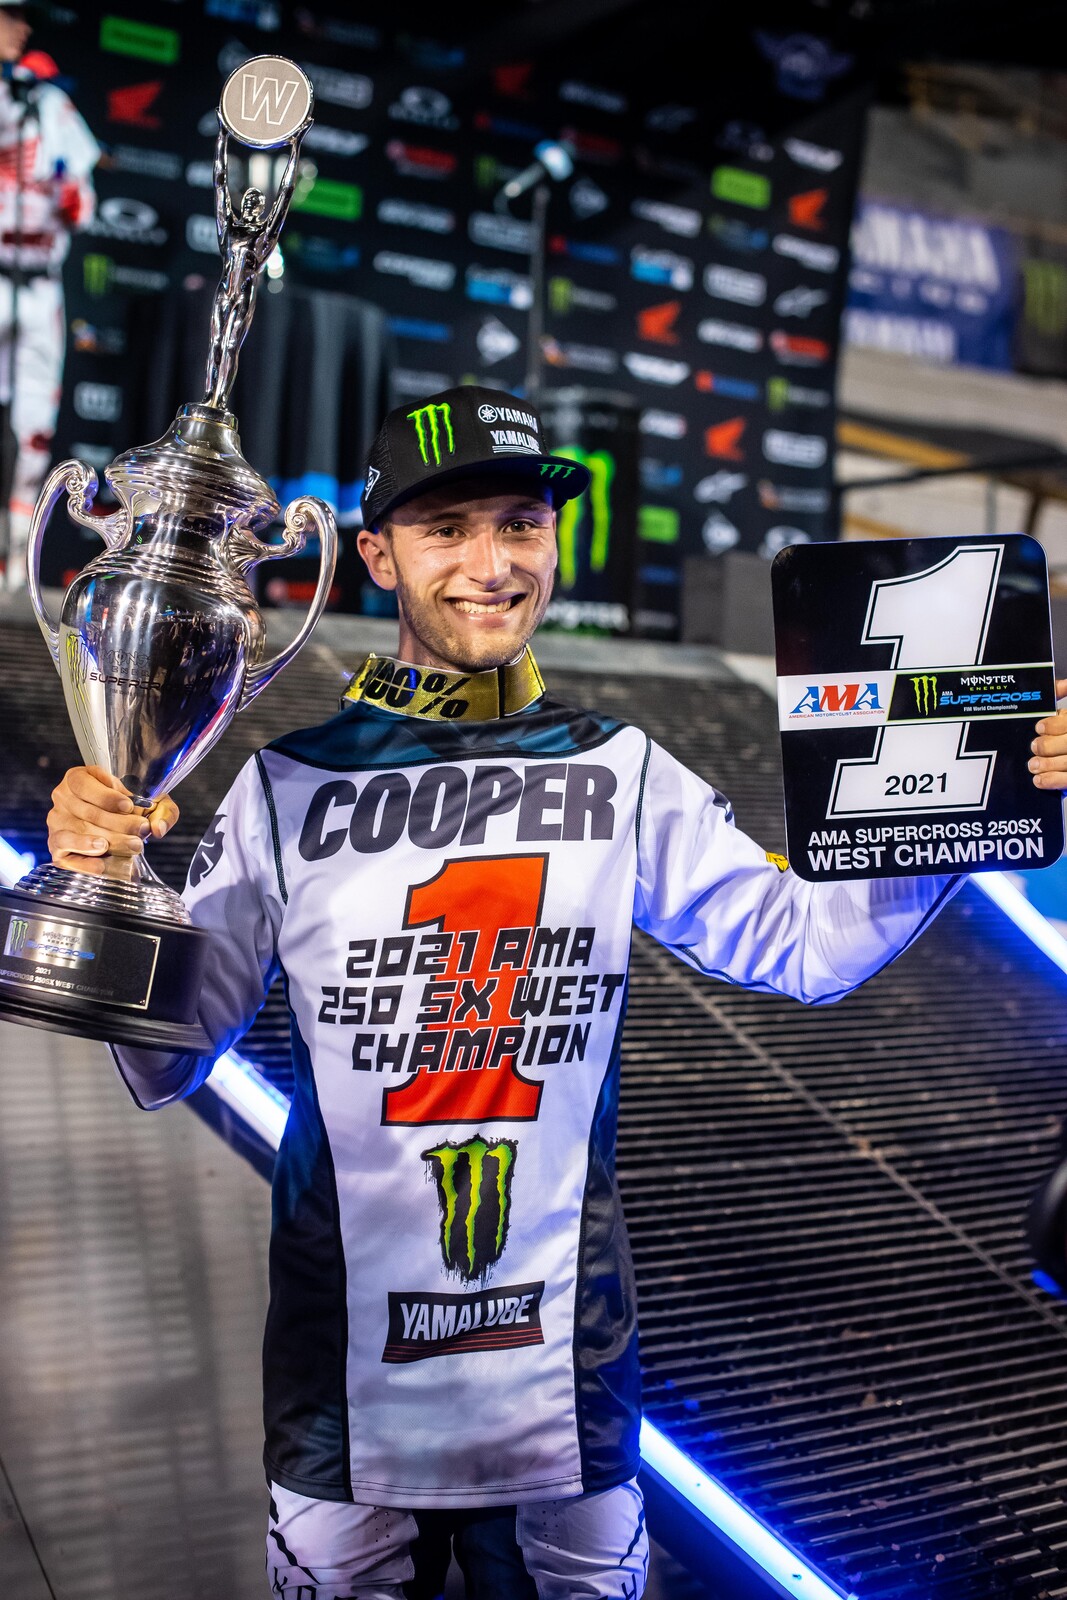 Justin Cooper’s Consistency Since Turning Pro Led to 2021 250SX West ...